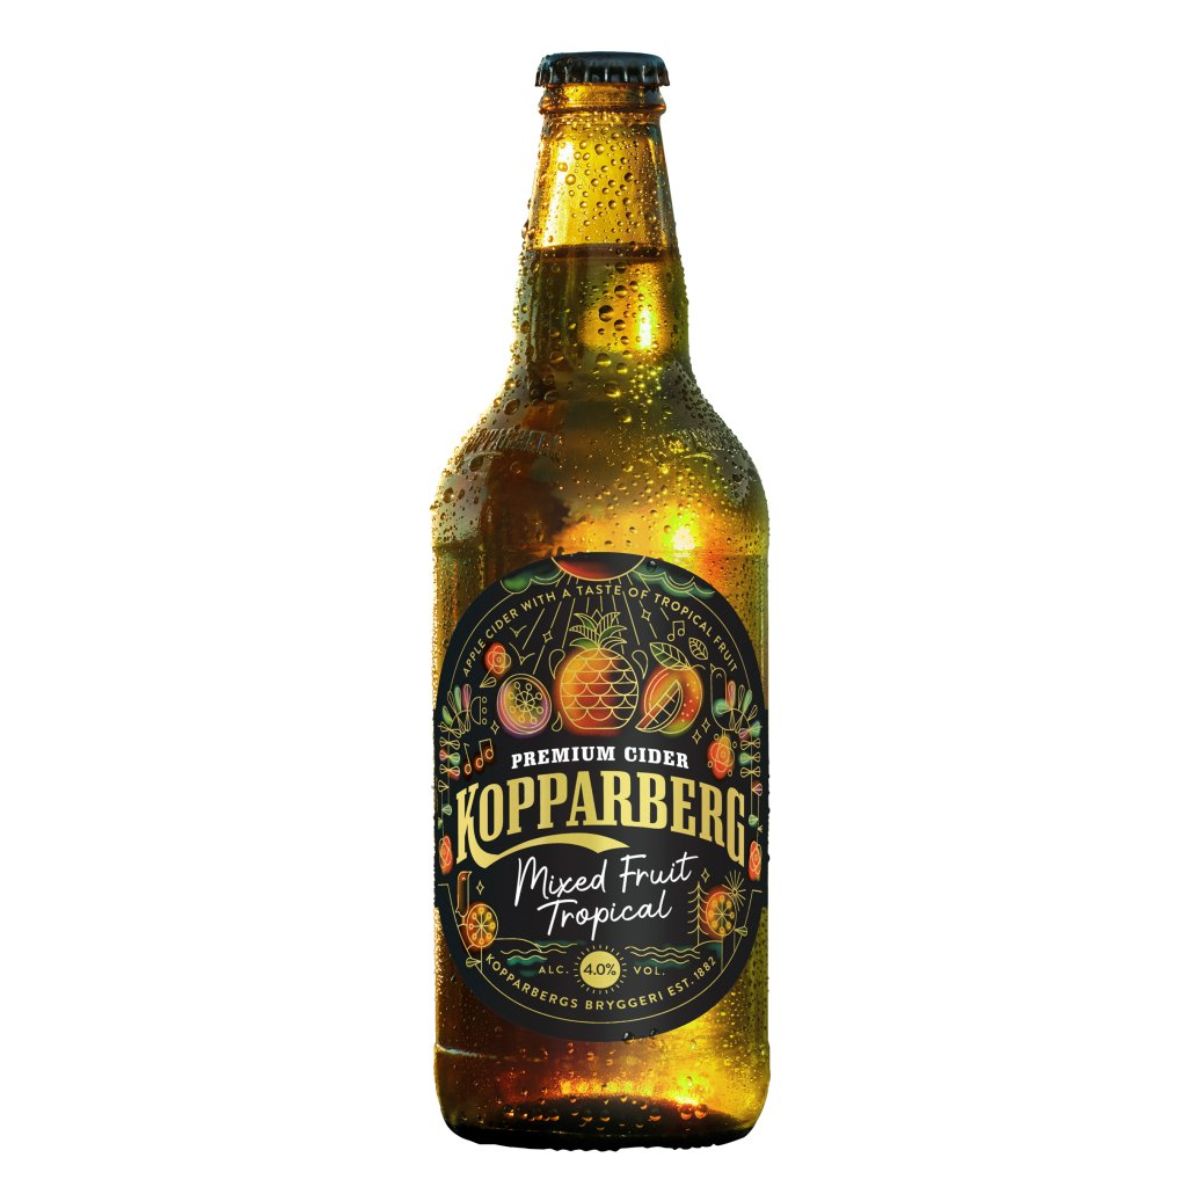 A bottle of Kopparberg - Mixed Fruit Tropical (4.0% ABV) - 500ml on a white background.